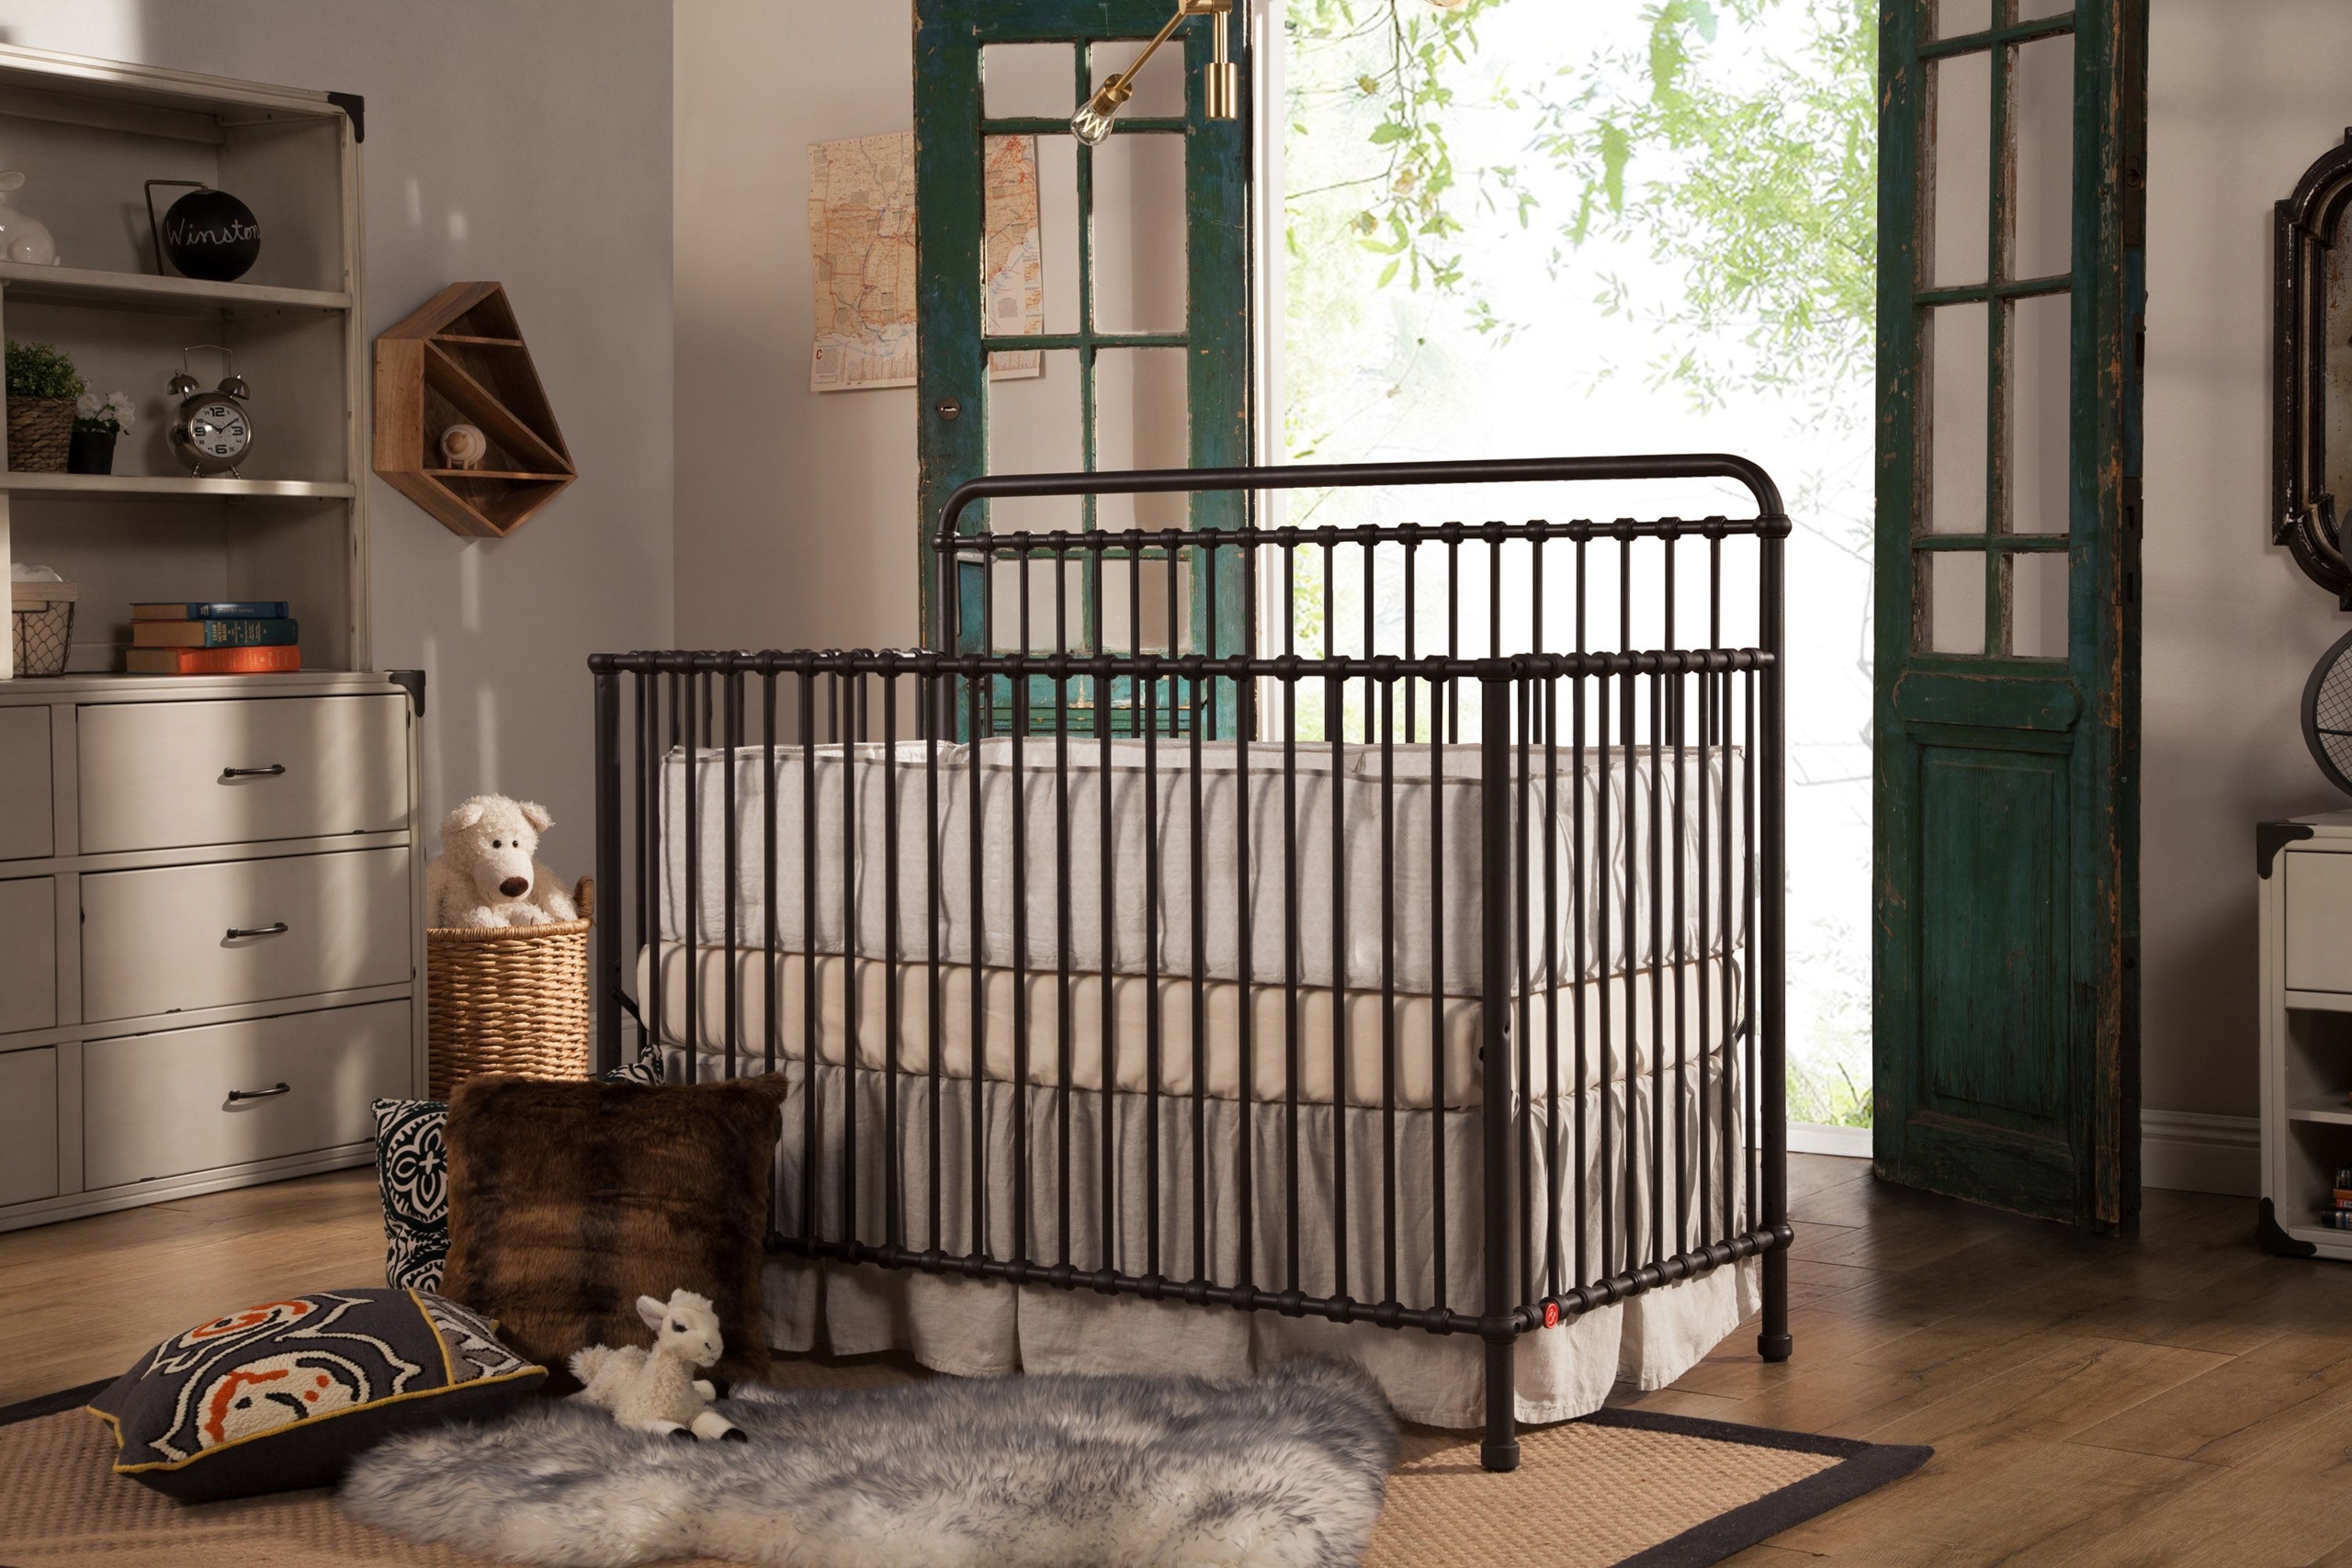 50 Vintage Baby Crib You Ll Love In 2020 Visual Hunt